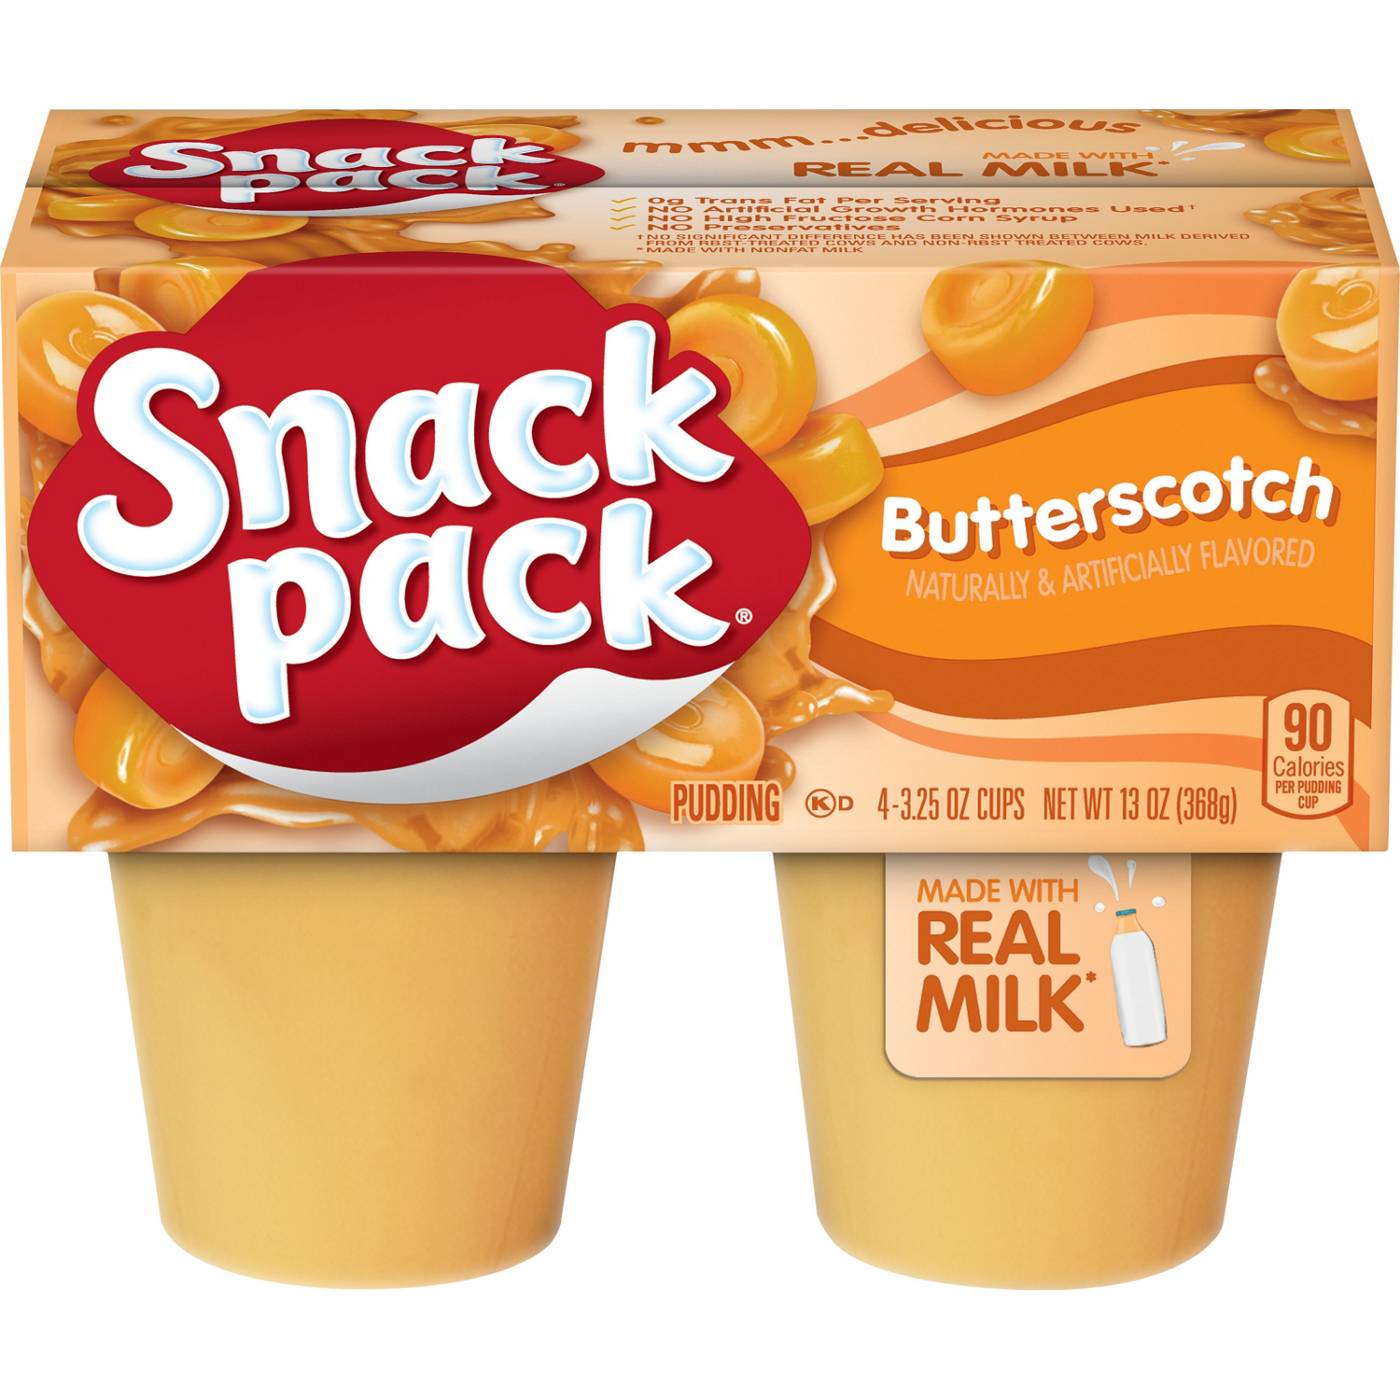 Snack Pack Butterscotch Pudding Cups; image 1 of 7